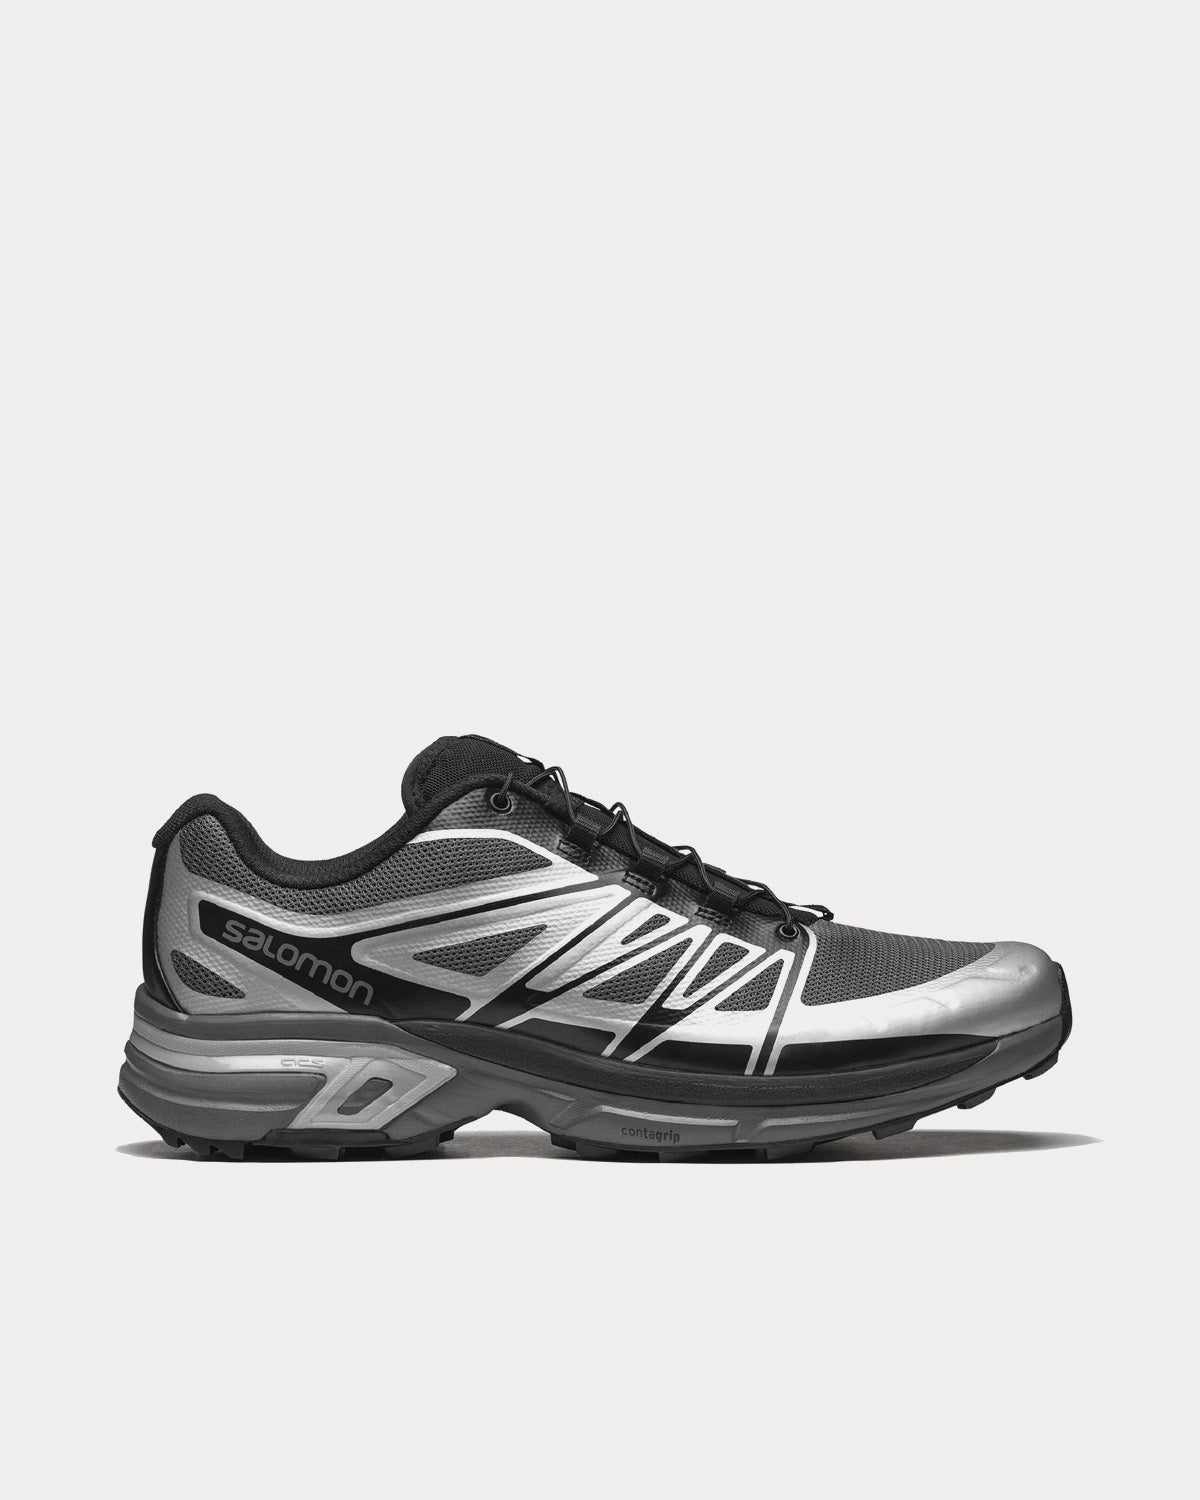 XT-Wings 2 Silver / Quiet Shade / Black Low Top Sneakers